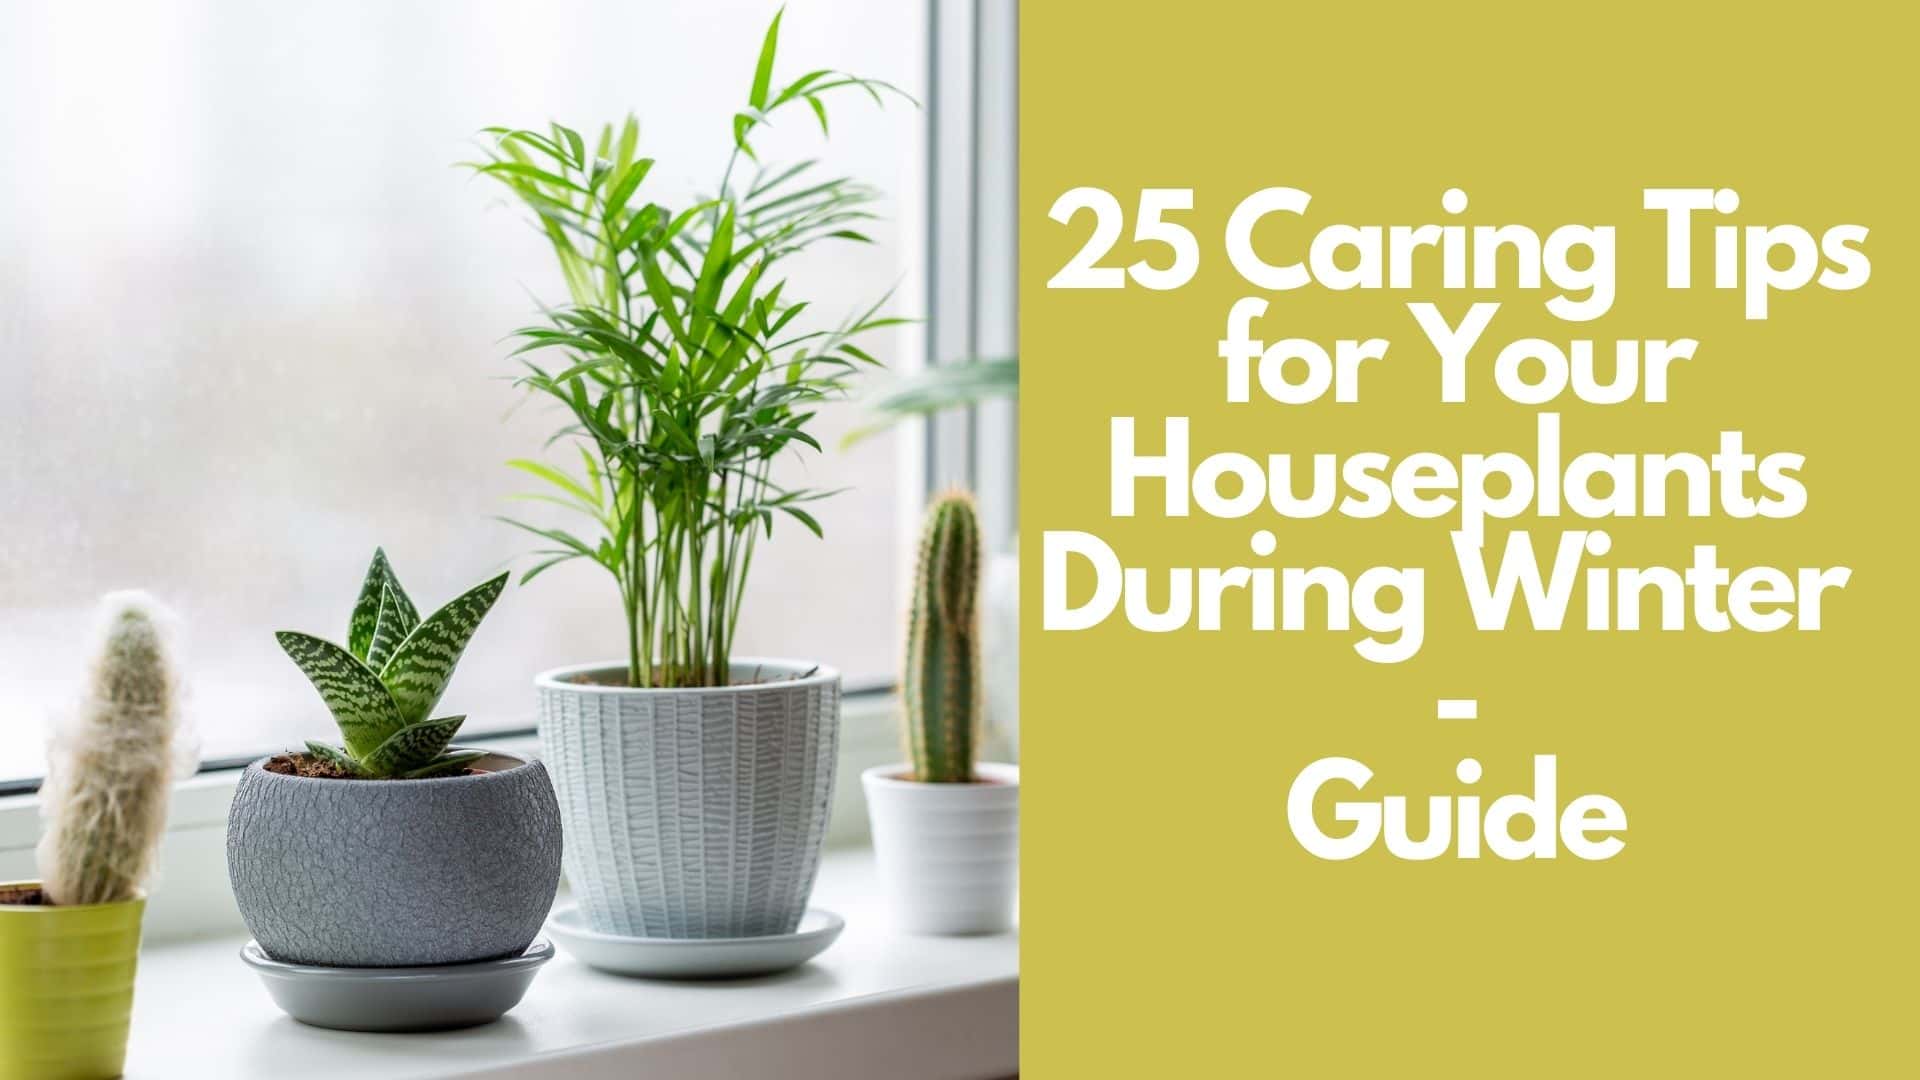 25 Caring Tips for Your Houseplants During Winter | Guide